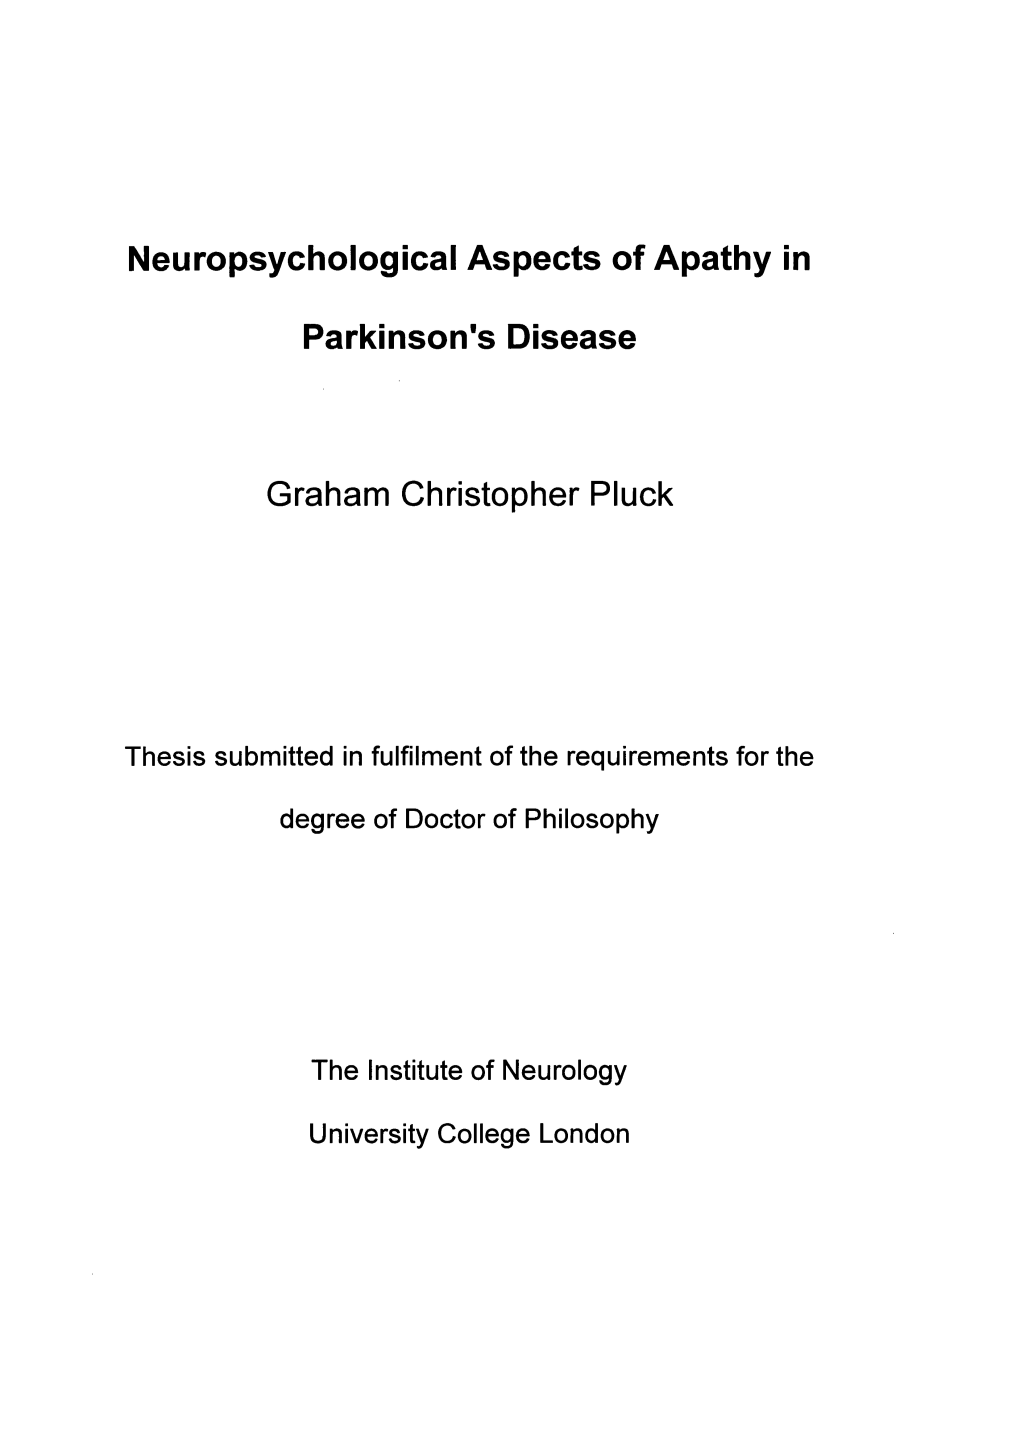 Neuropsychological Aspects of Apathy in Parkinson's Disease